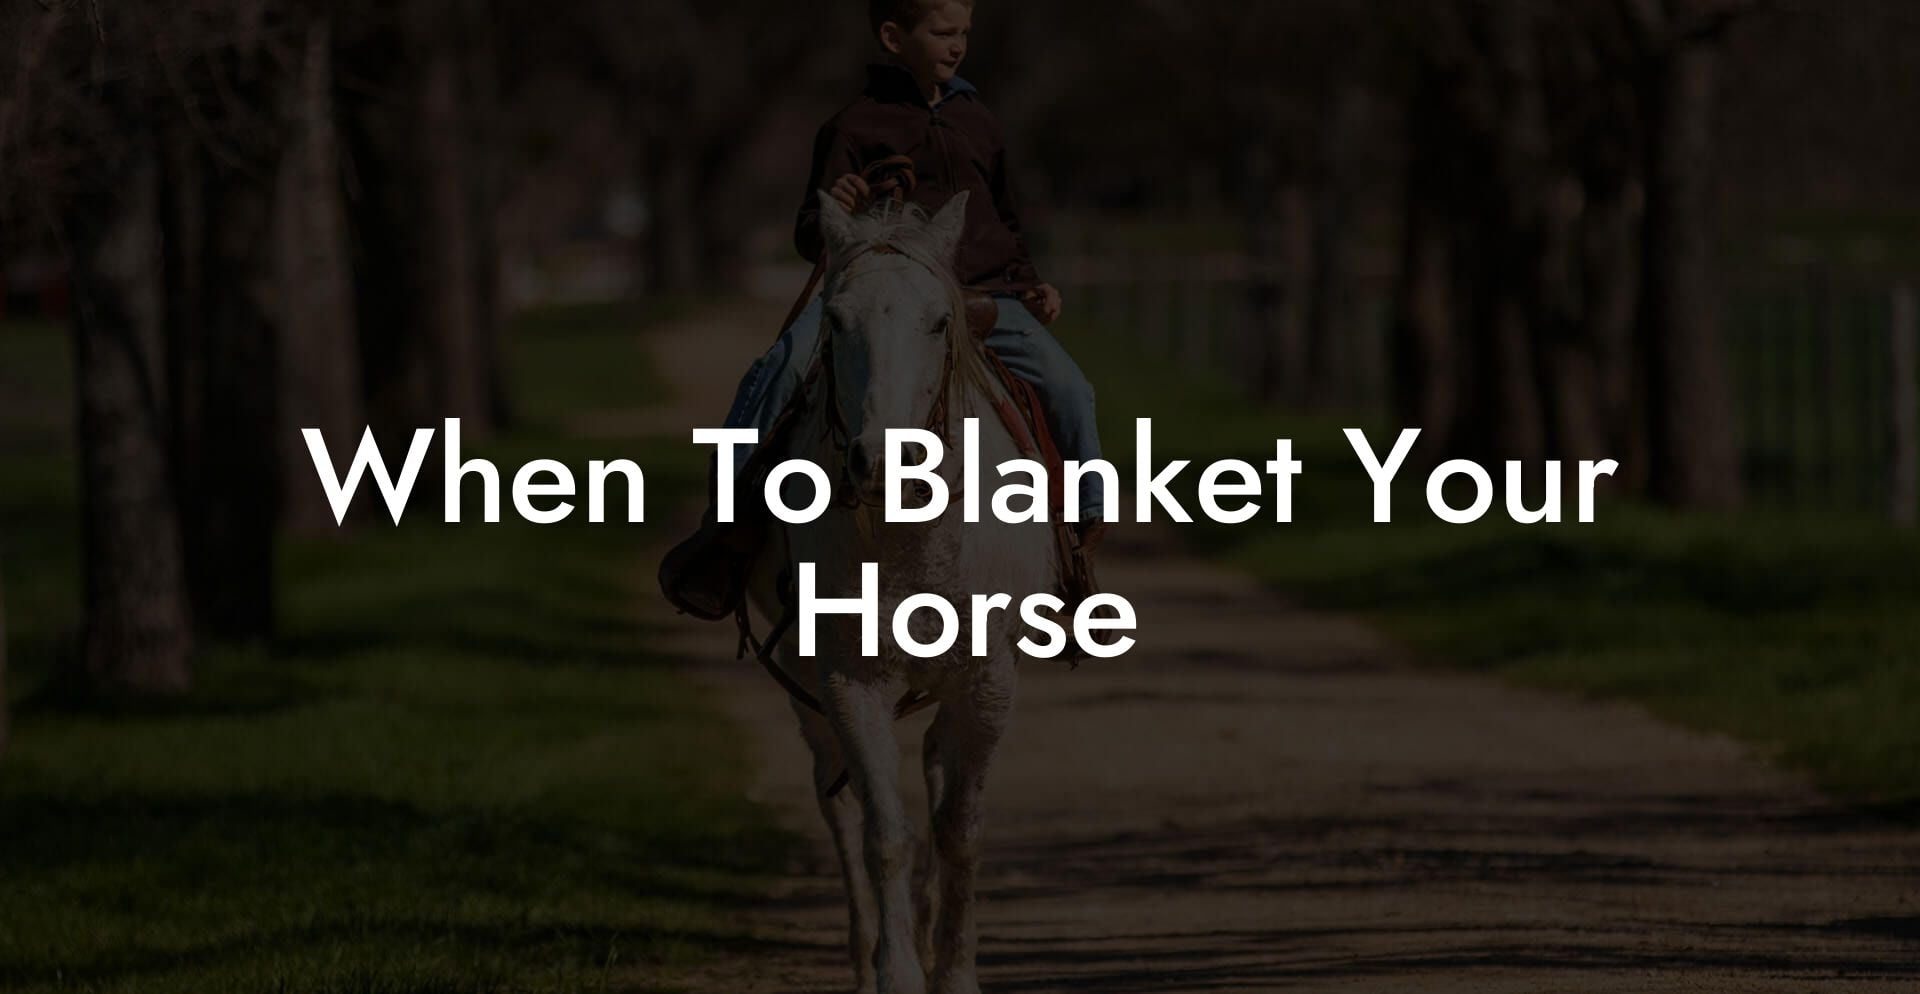 When To Blanket Your Horse